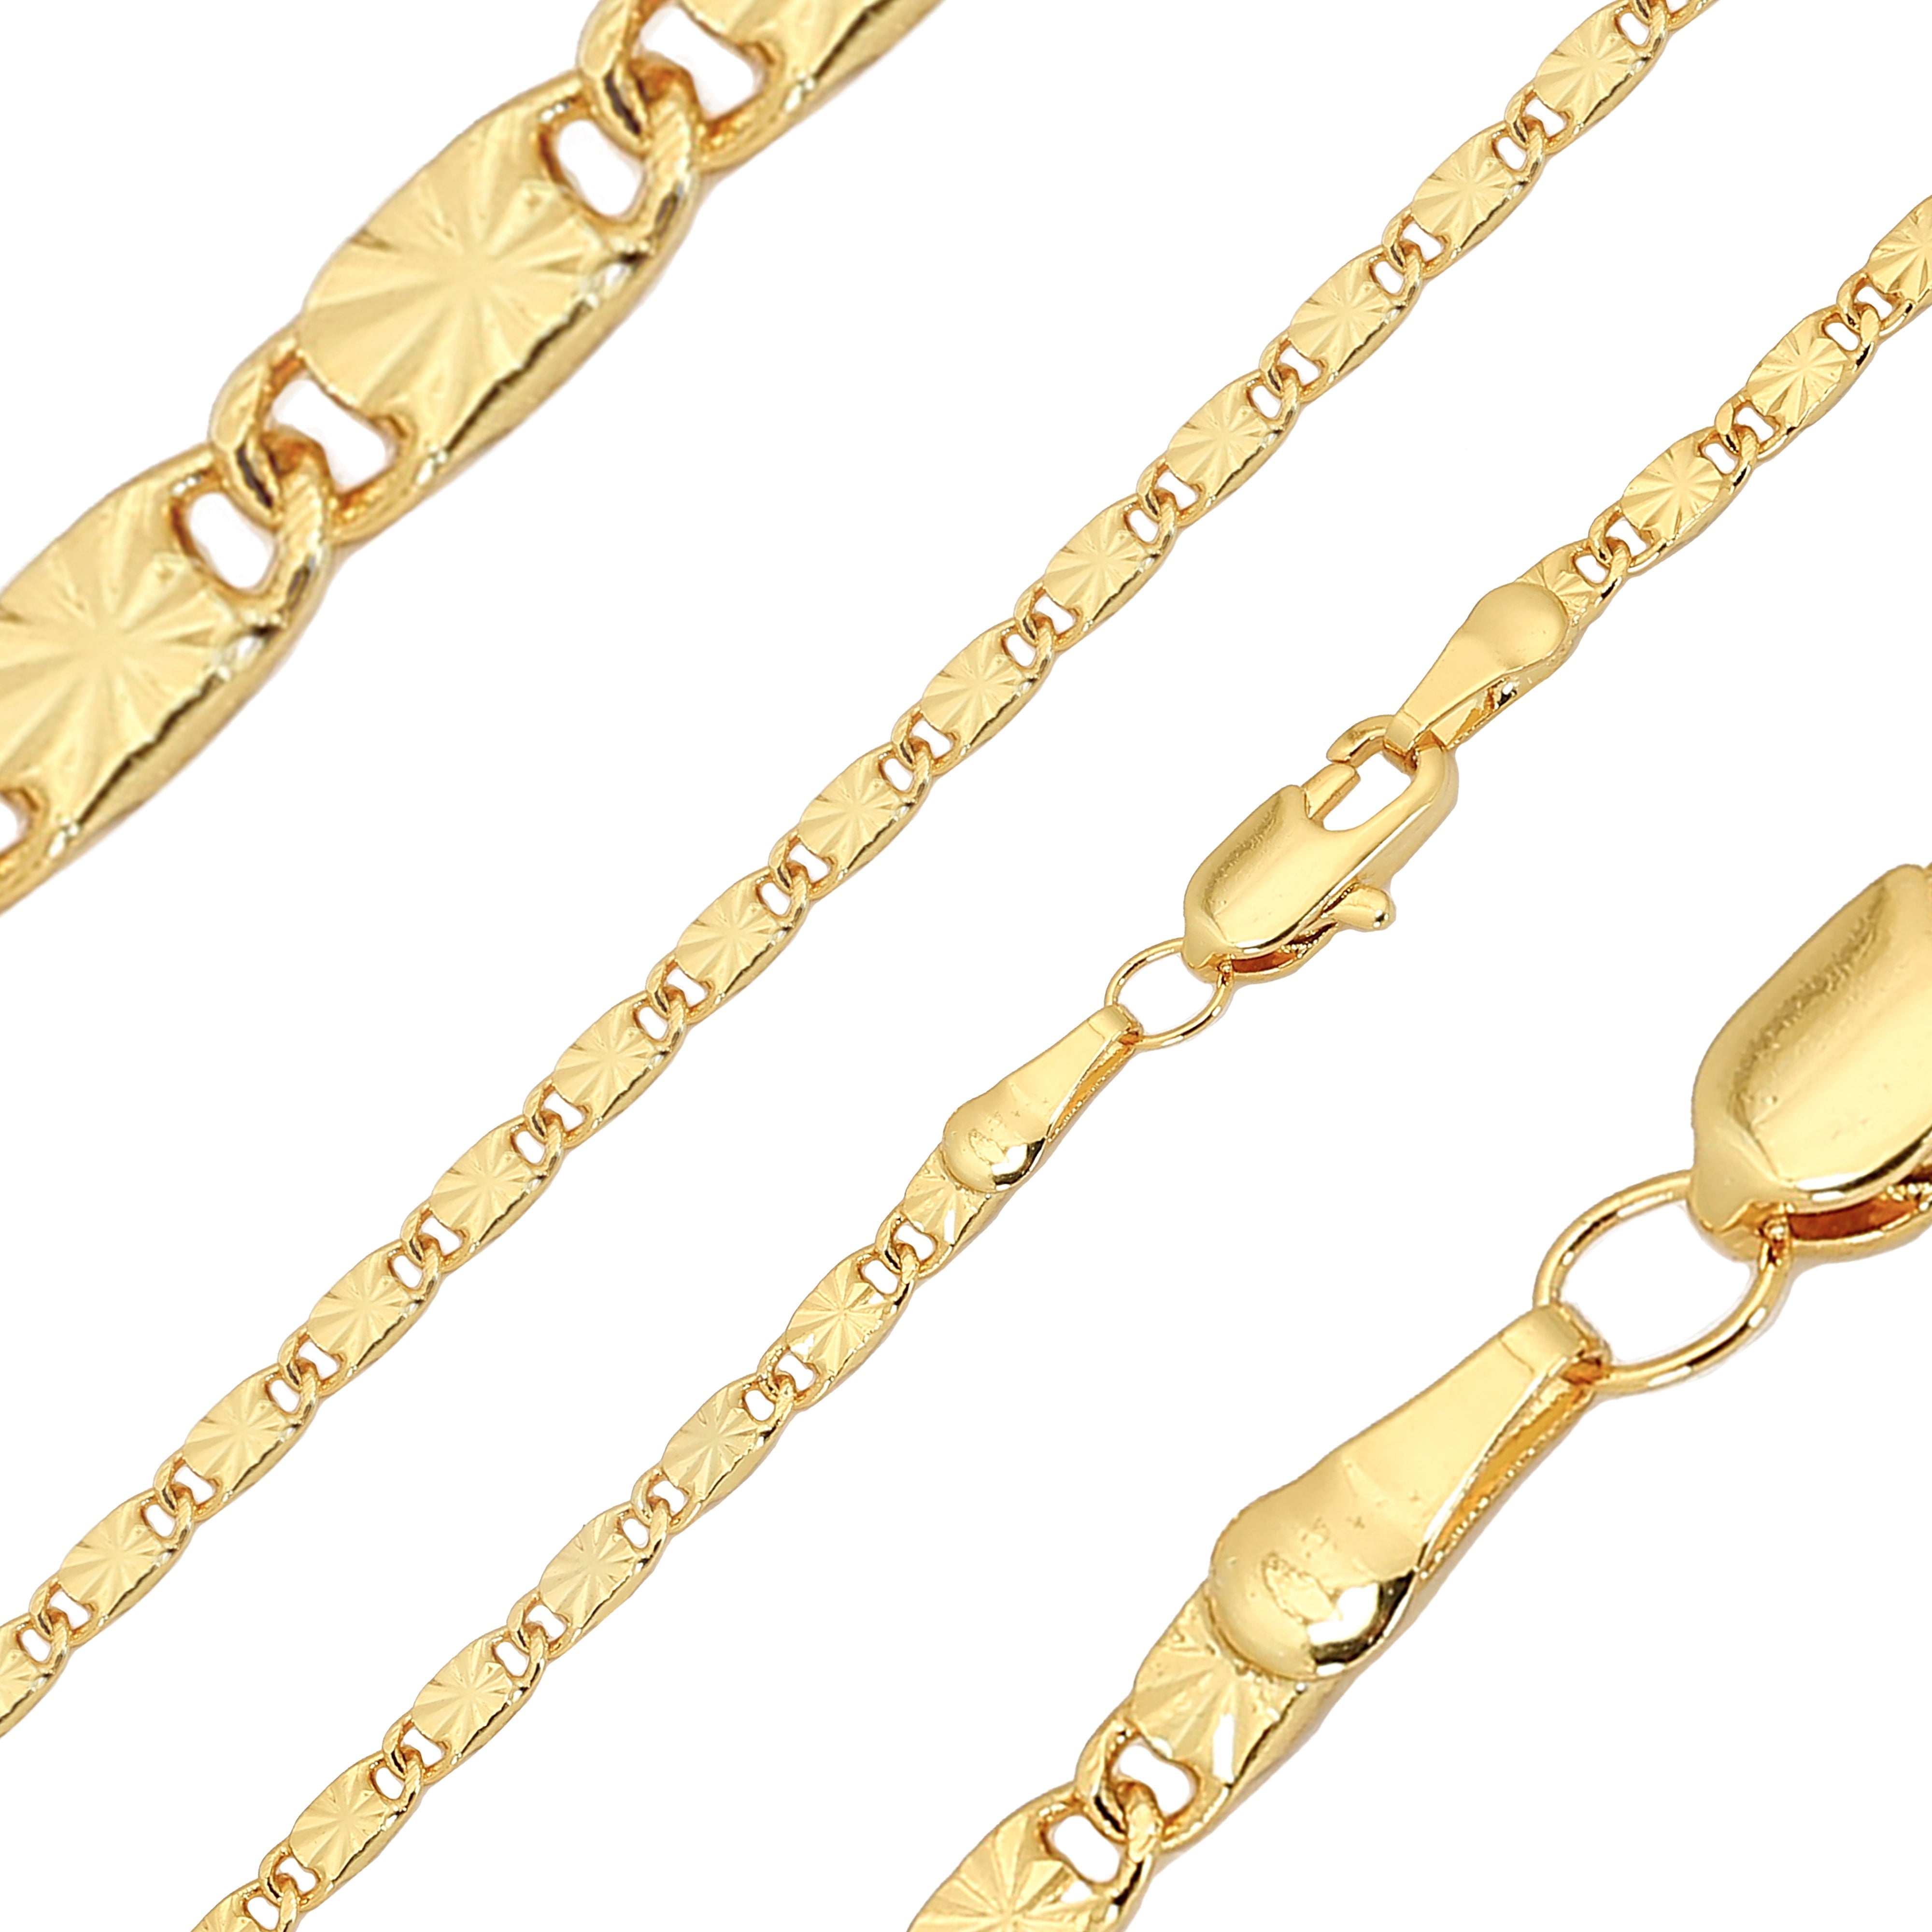 .Classic solid snail link sunburst hammered chains plated in White Gold, 14K Gold, Rose Gold, two tone